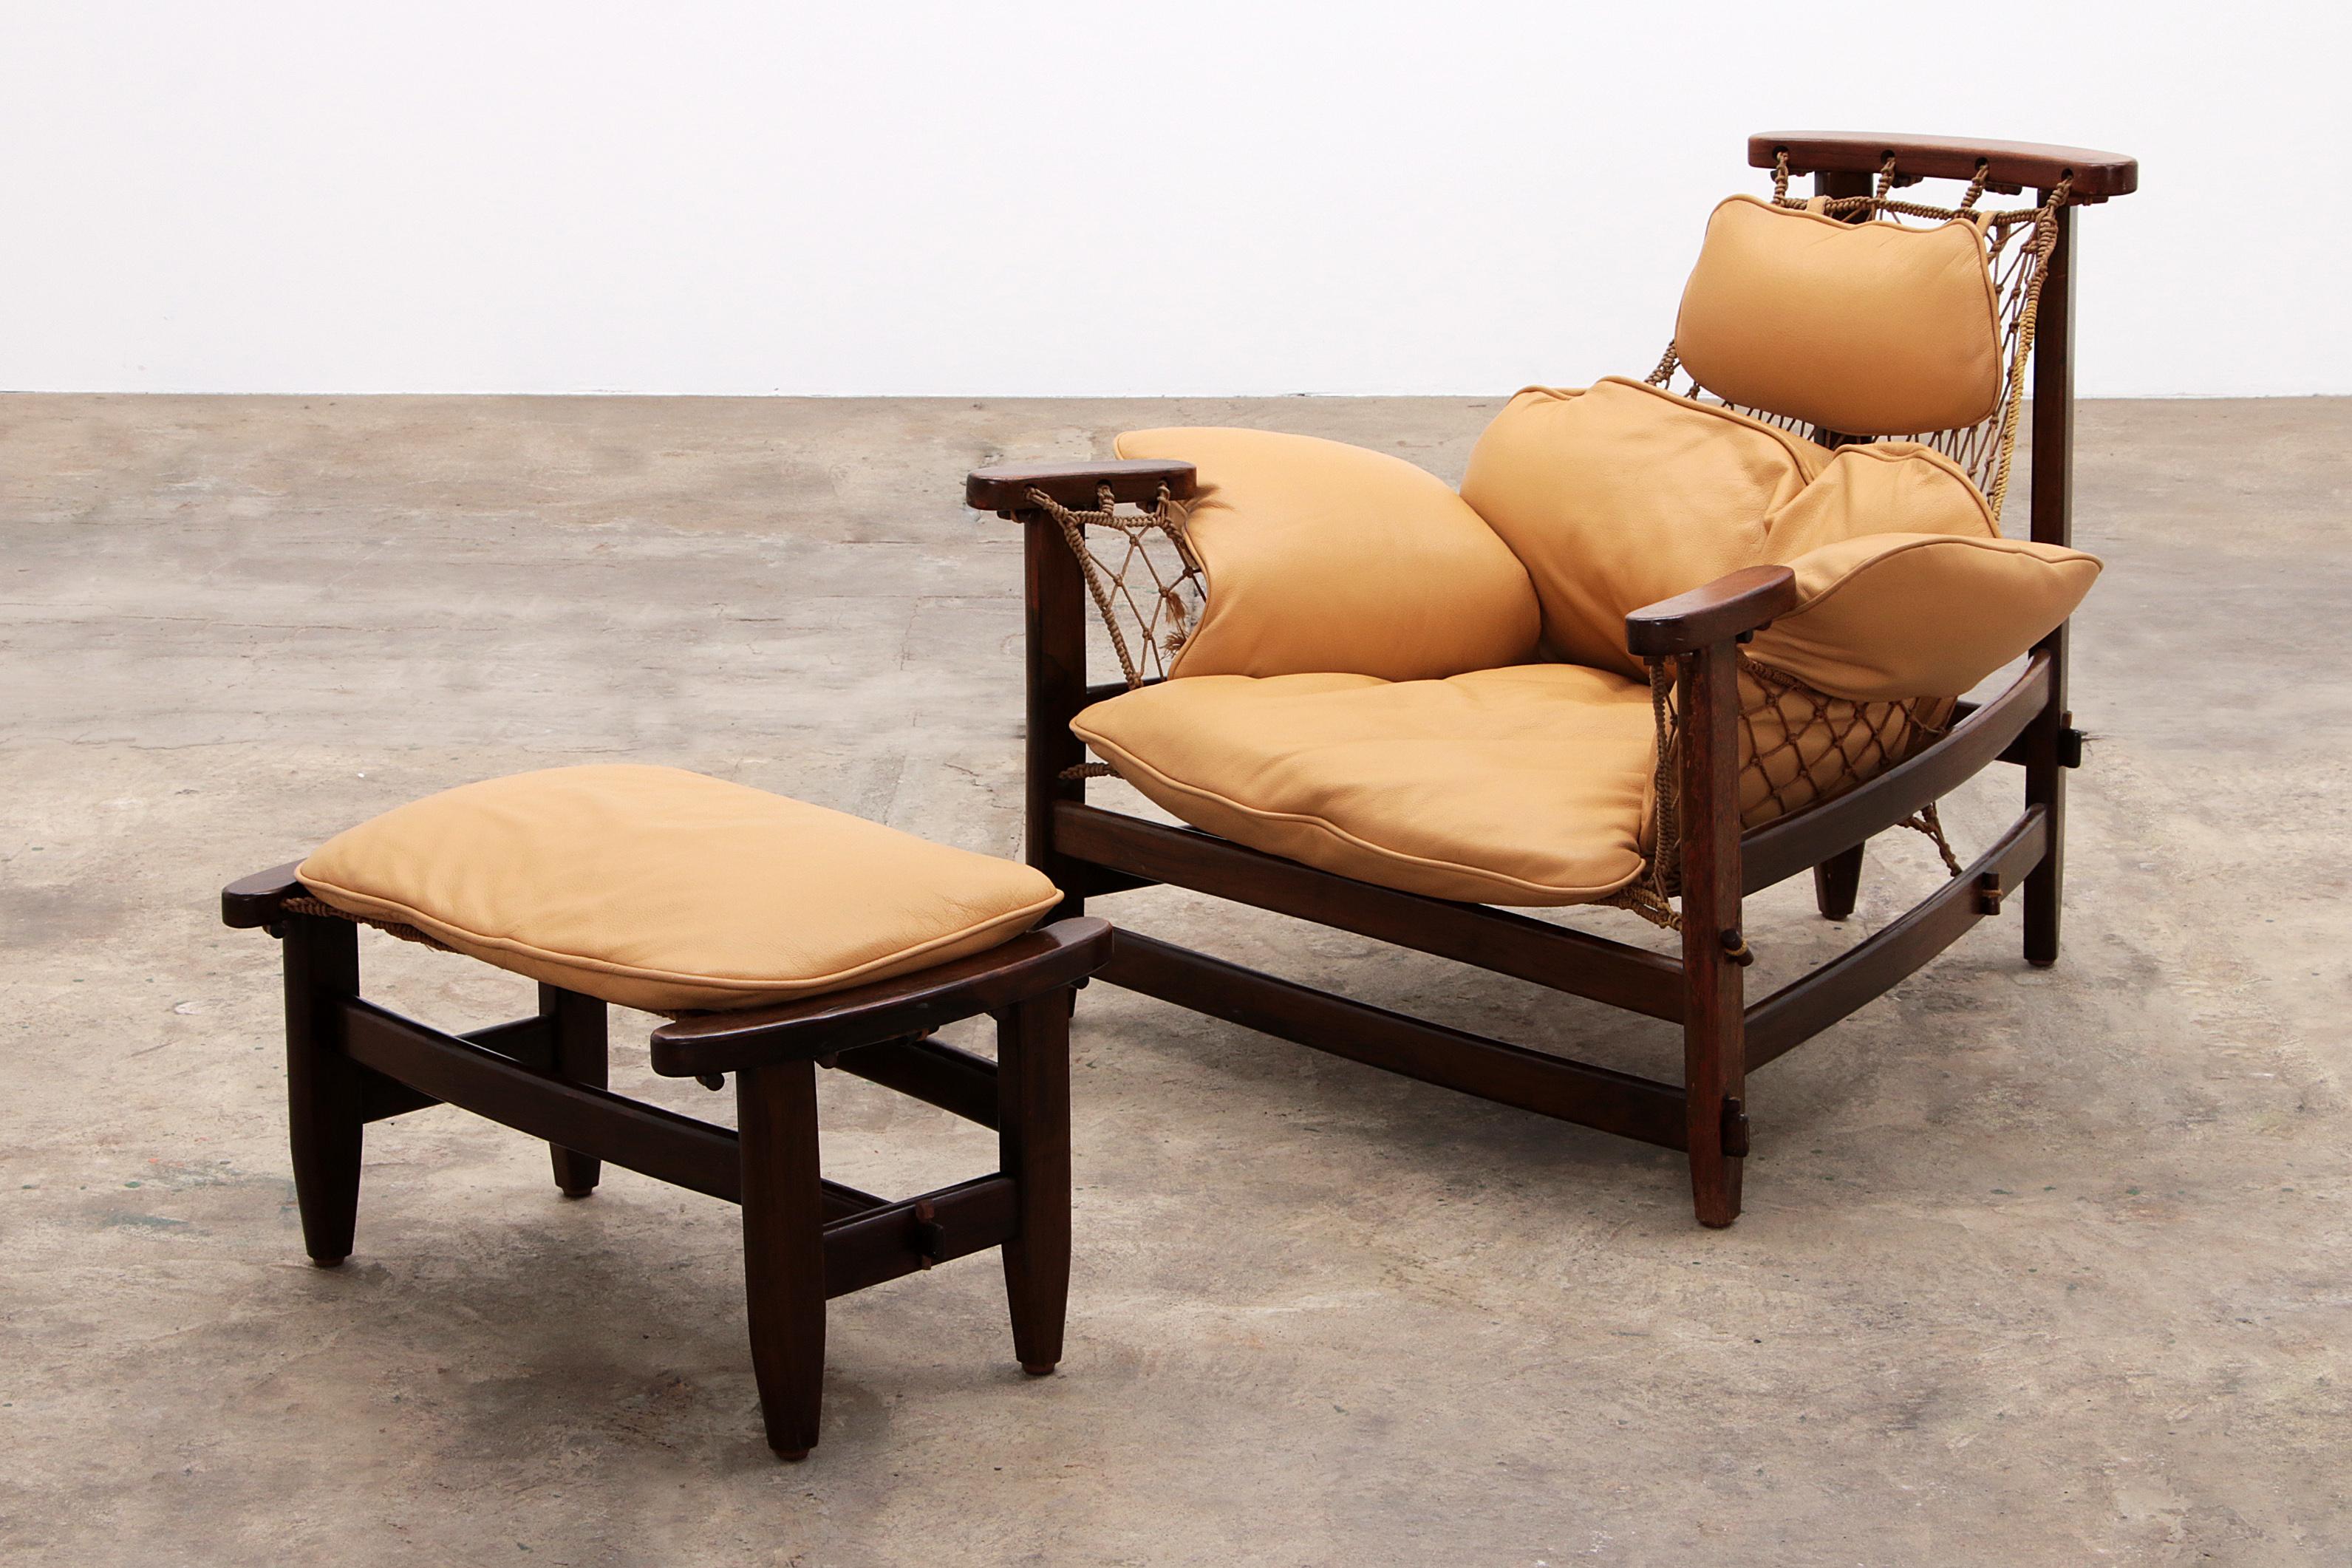 Mid-Century Modern Jean Gillon 'Jangada' lounge chair and ottoman in tropical wood and leather.